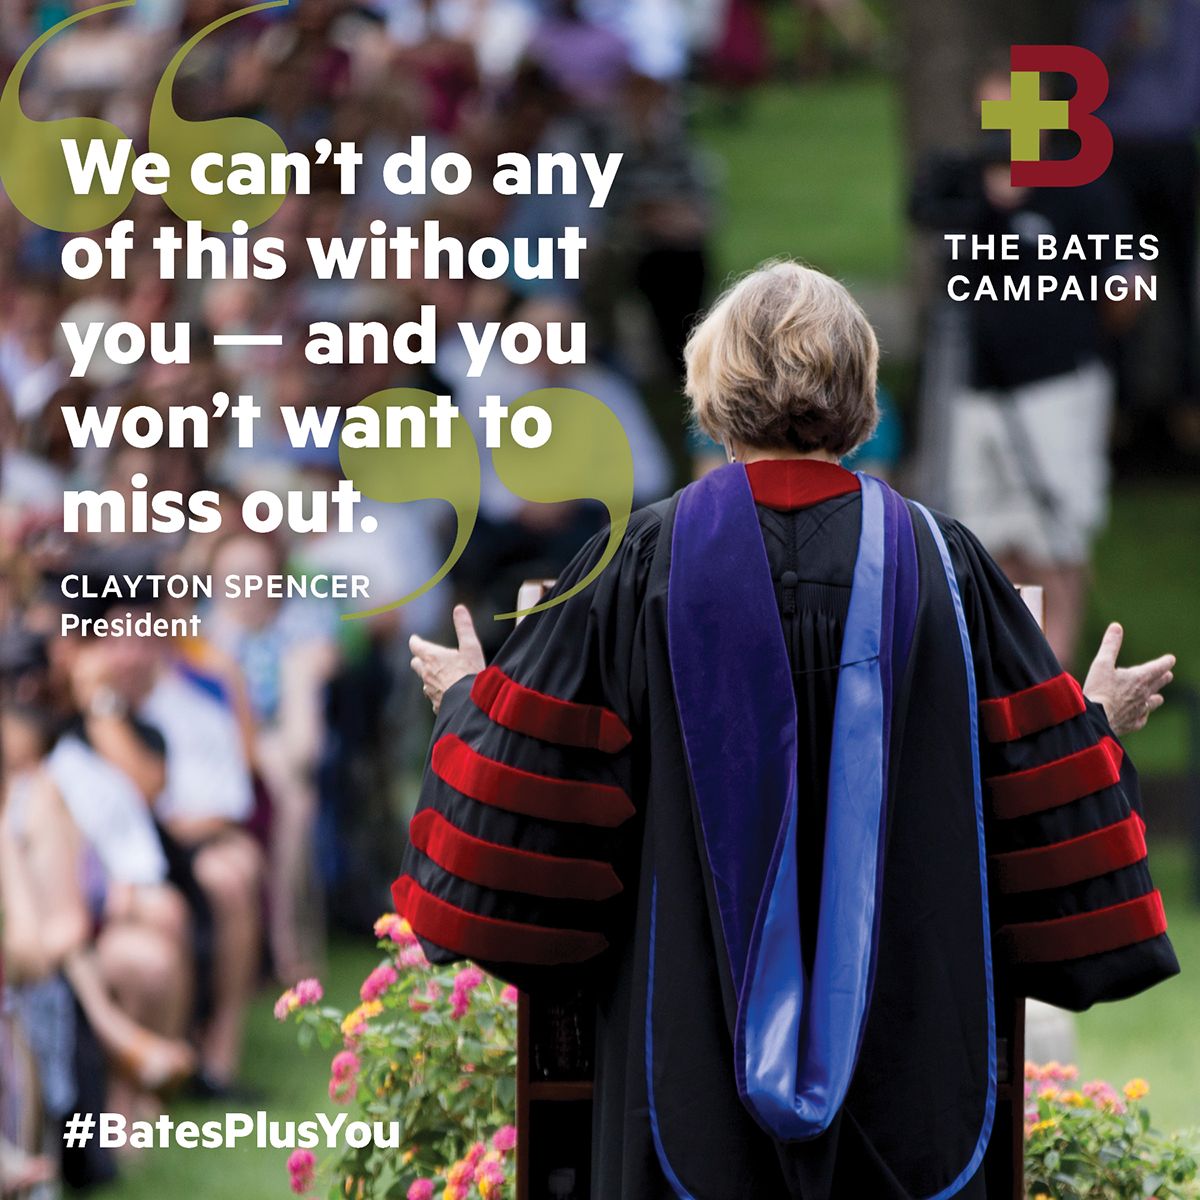 Celebrate the launch of The Bates Campaign and show your support by sharing #BatesPlusYou images and video on social media!